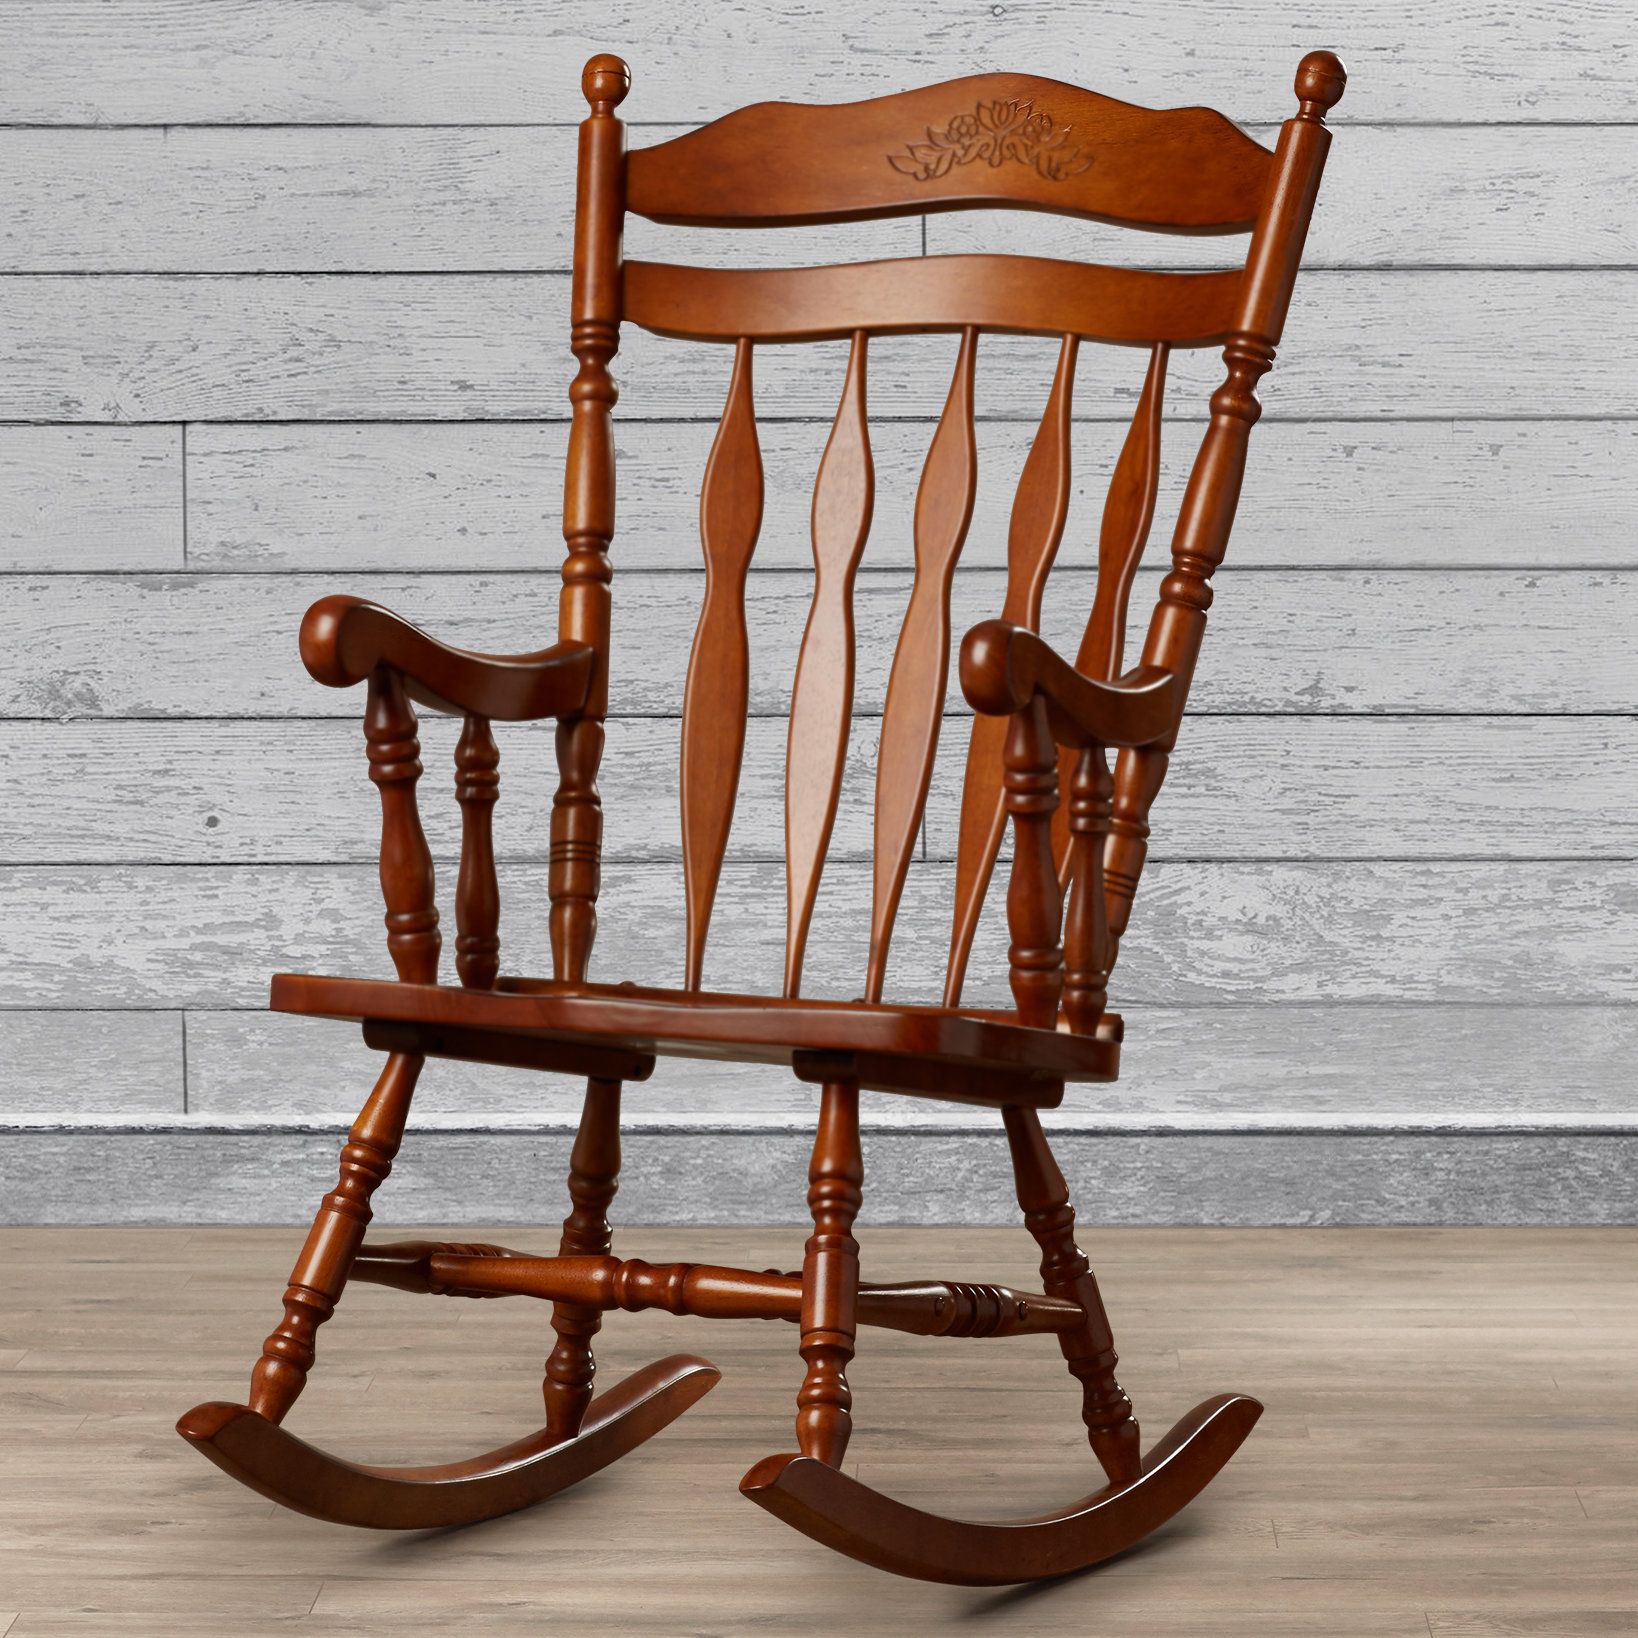 Rustic Rocking Chairs You'll Love In 2019 | Wayfair With Regard To Elegant Tobacco Brown Wooden Rocking Chairs (View 10 of 20)